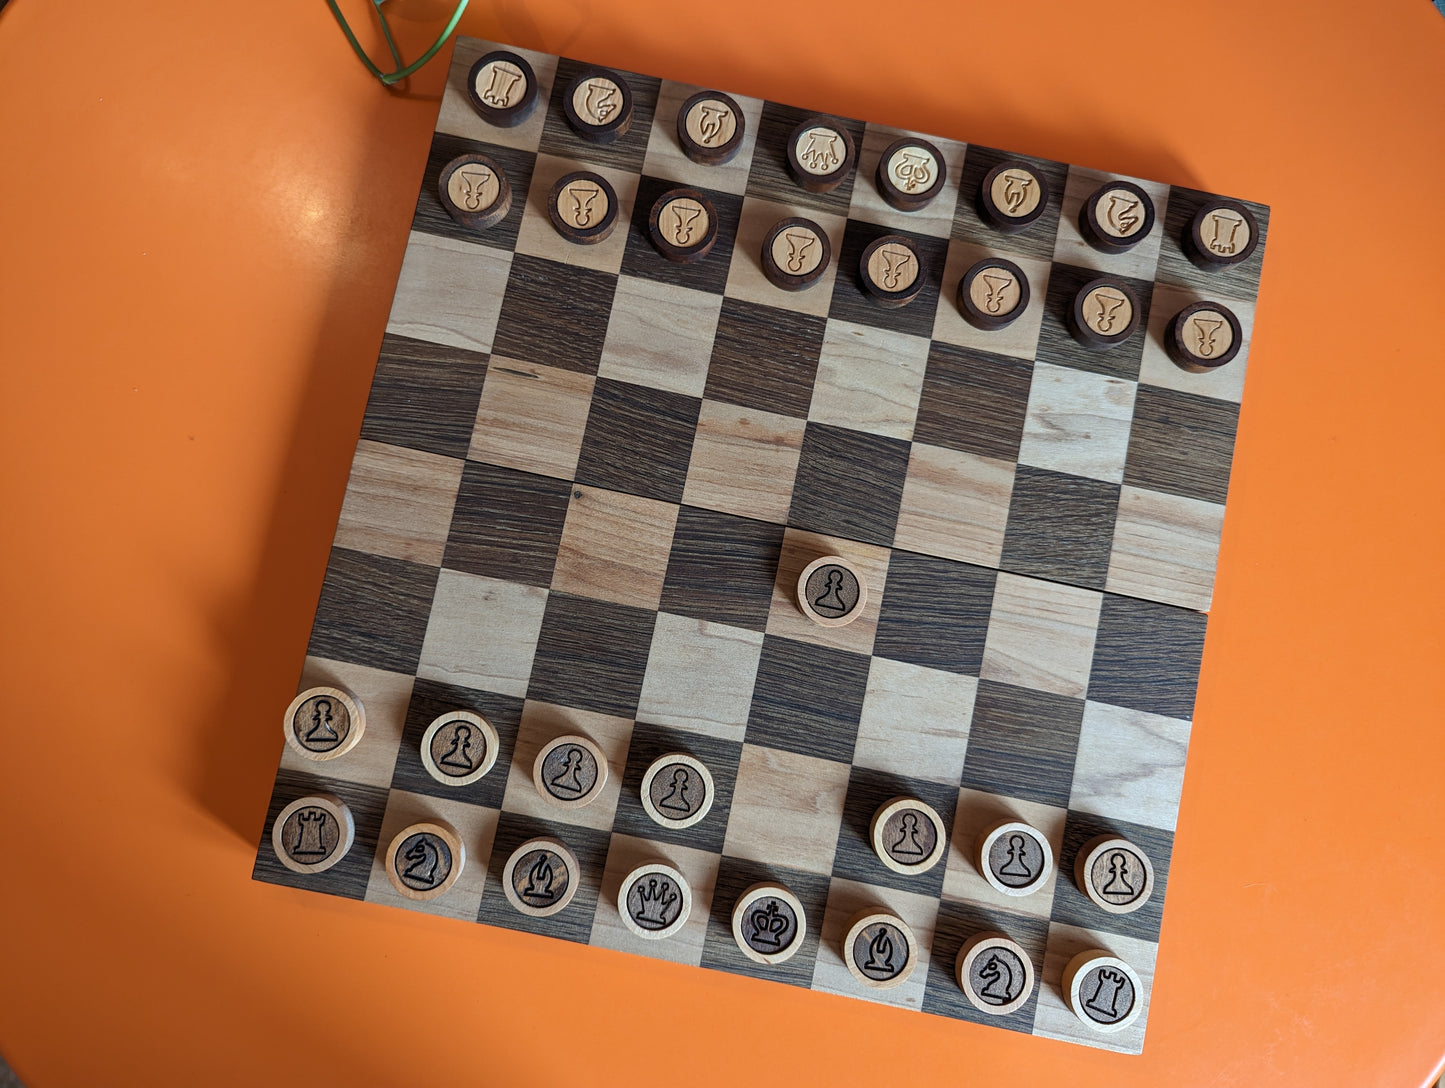 Portable checkers&chess set. Foldable wooden chessboard. Flat chess